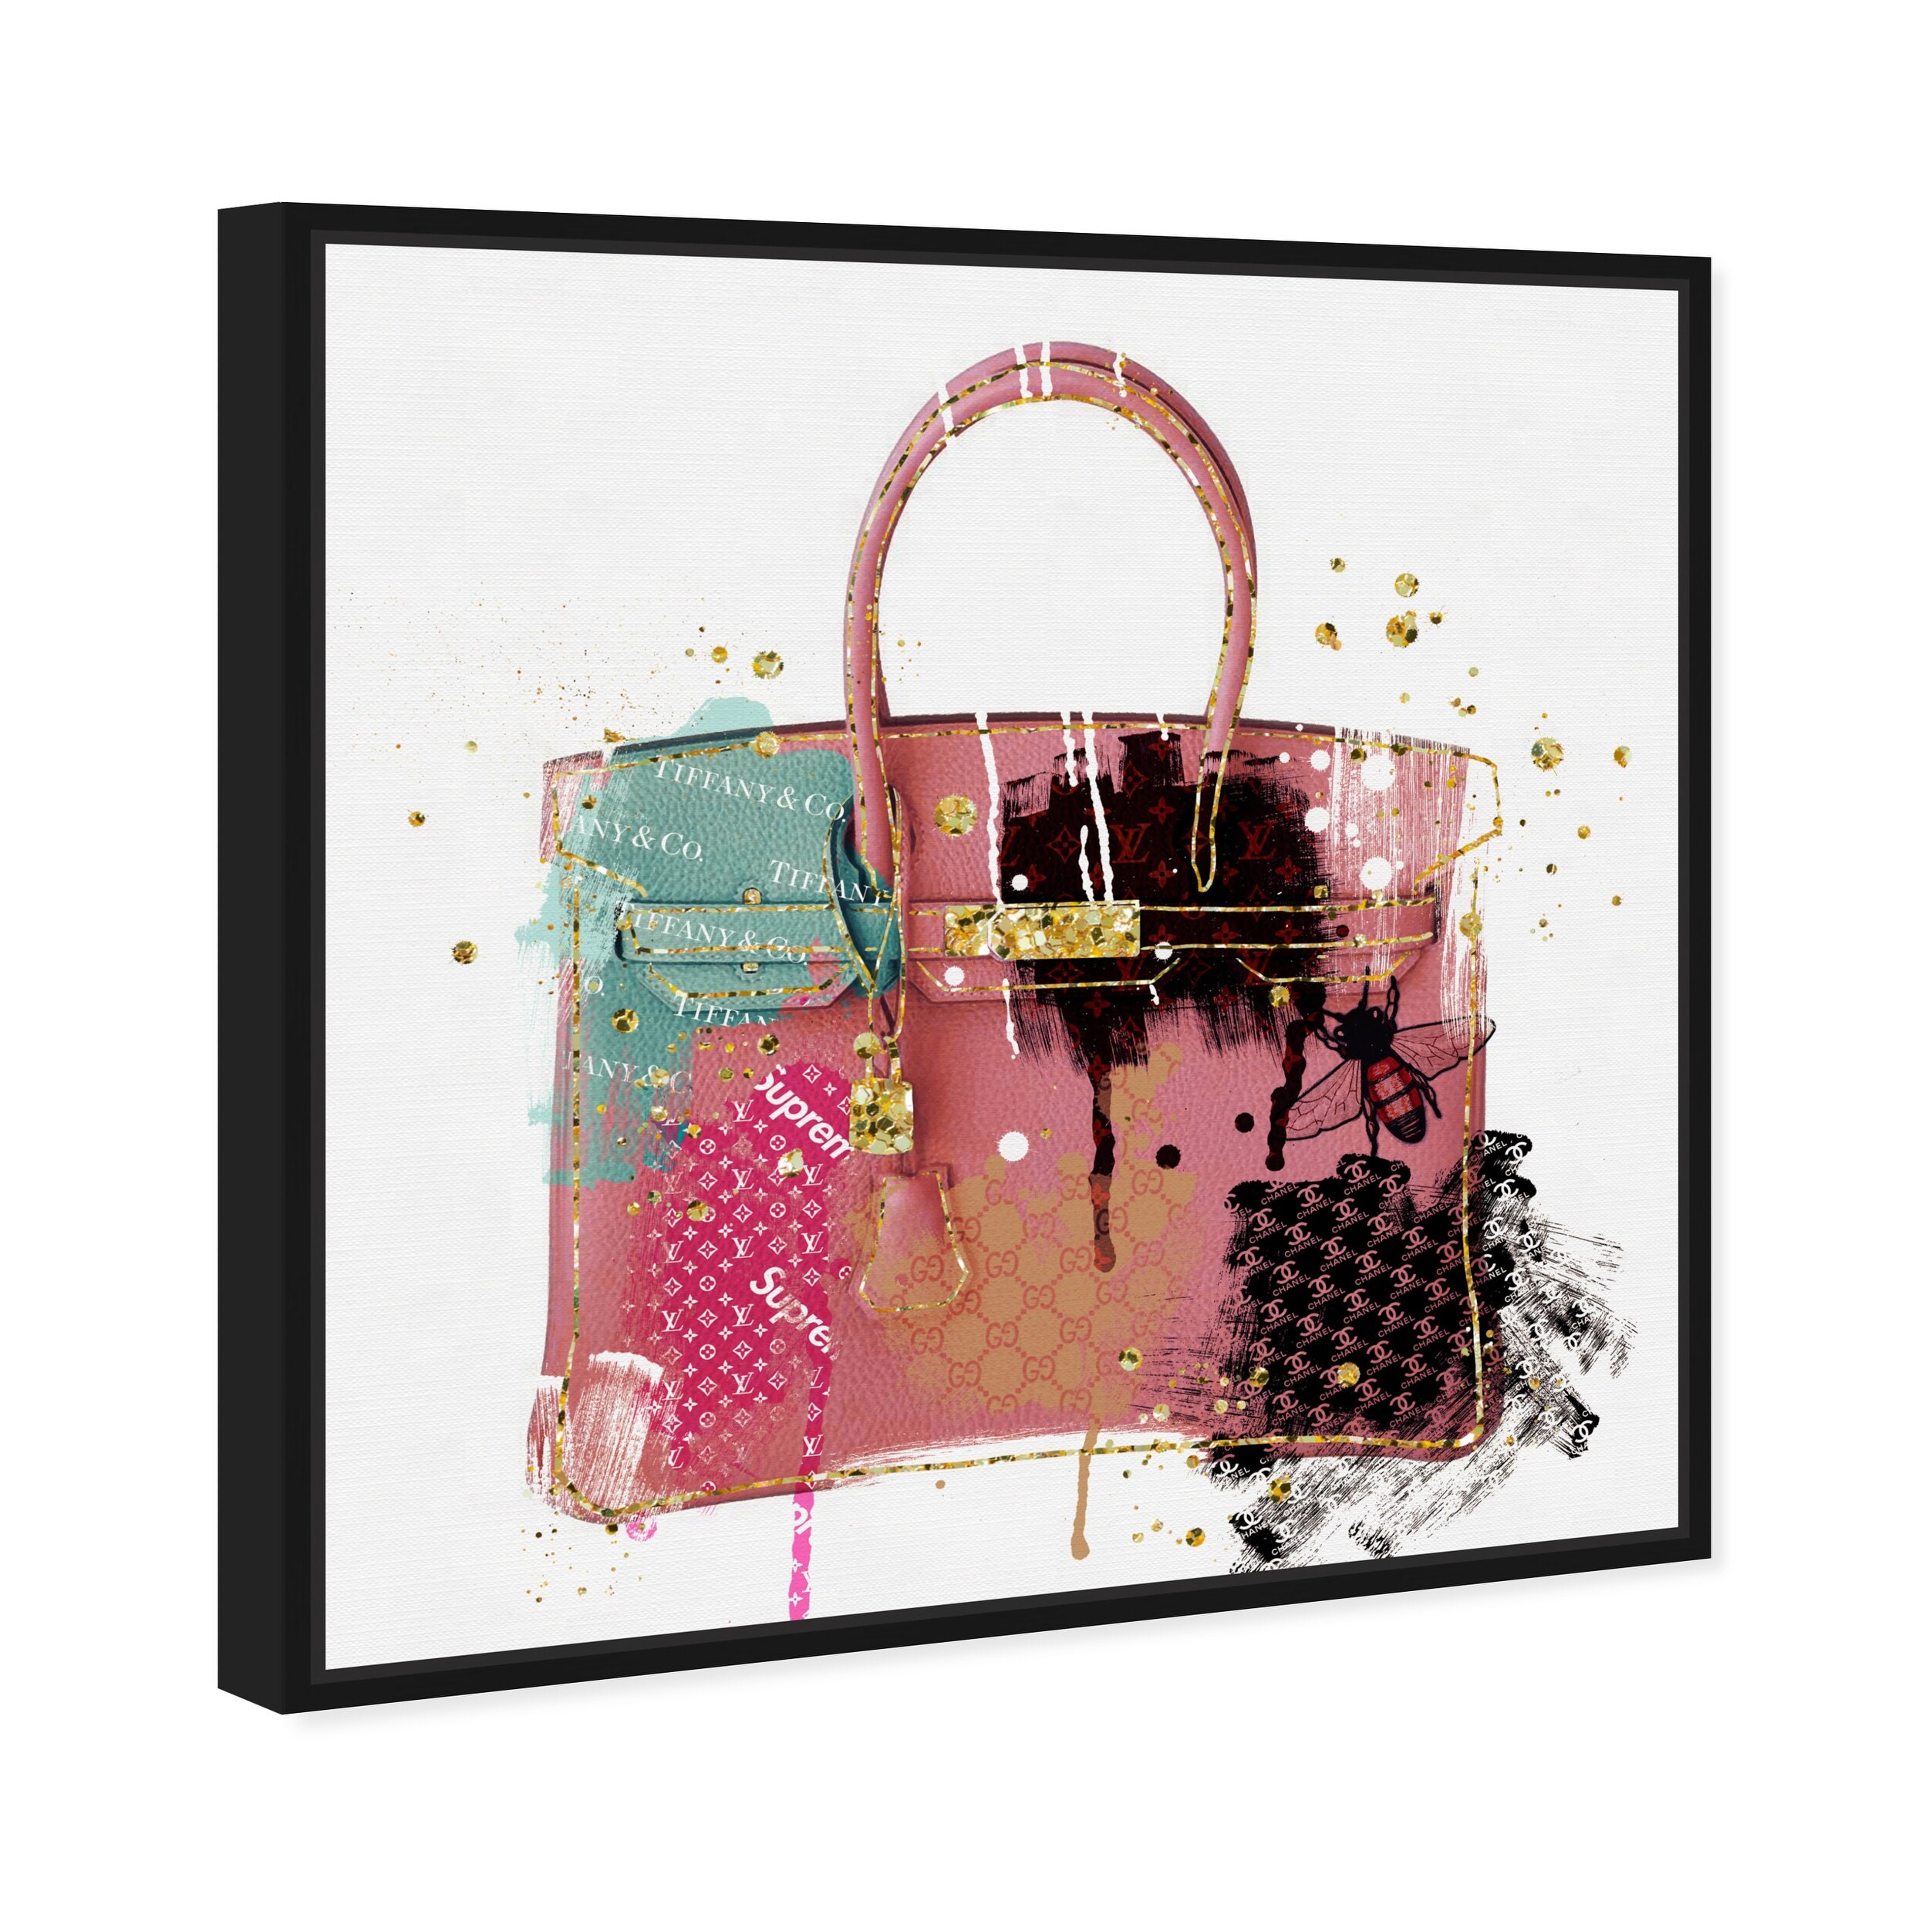 13 X 19 My Purse Collection Fashion And Glam Framed Wall Art